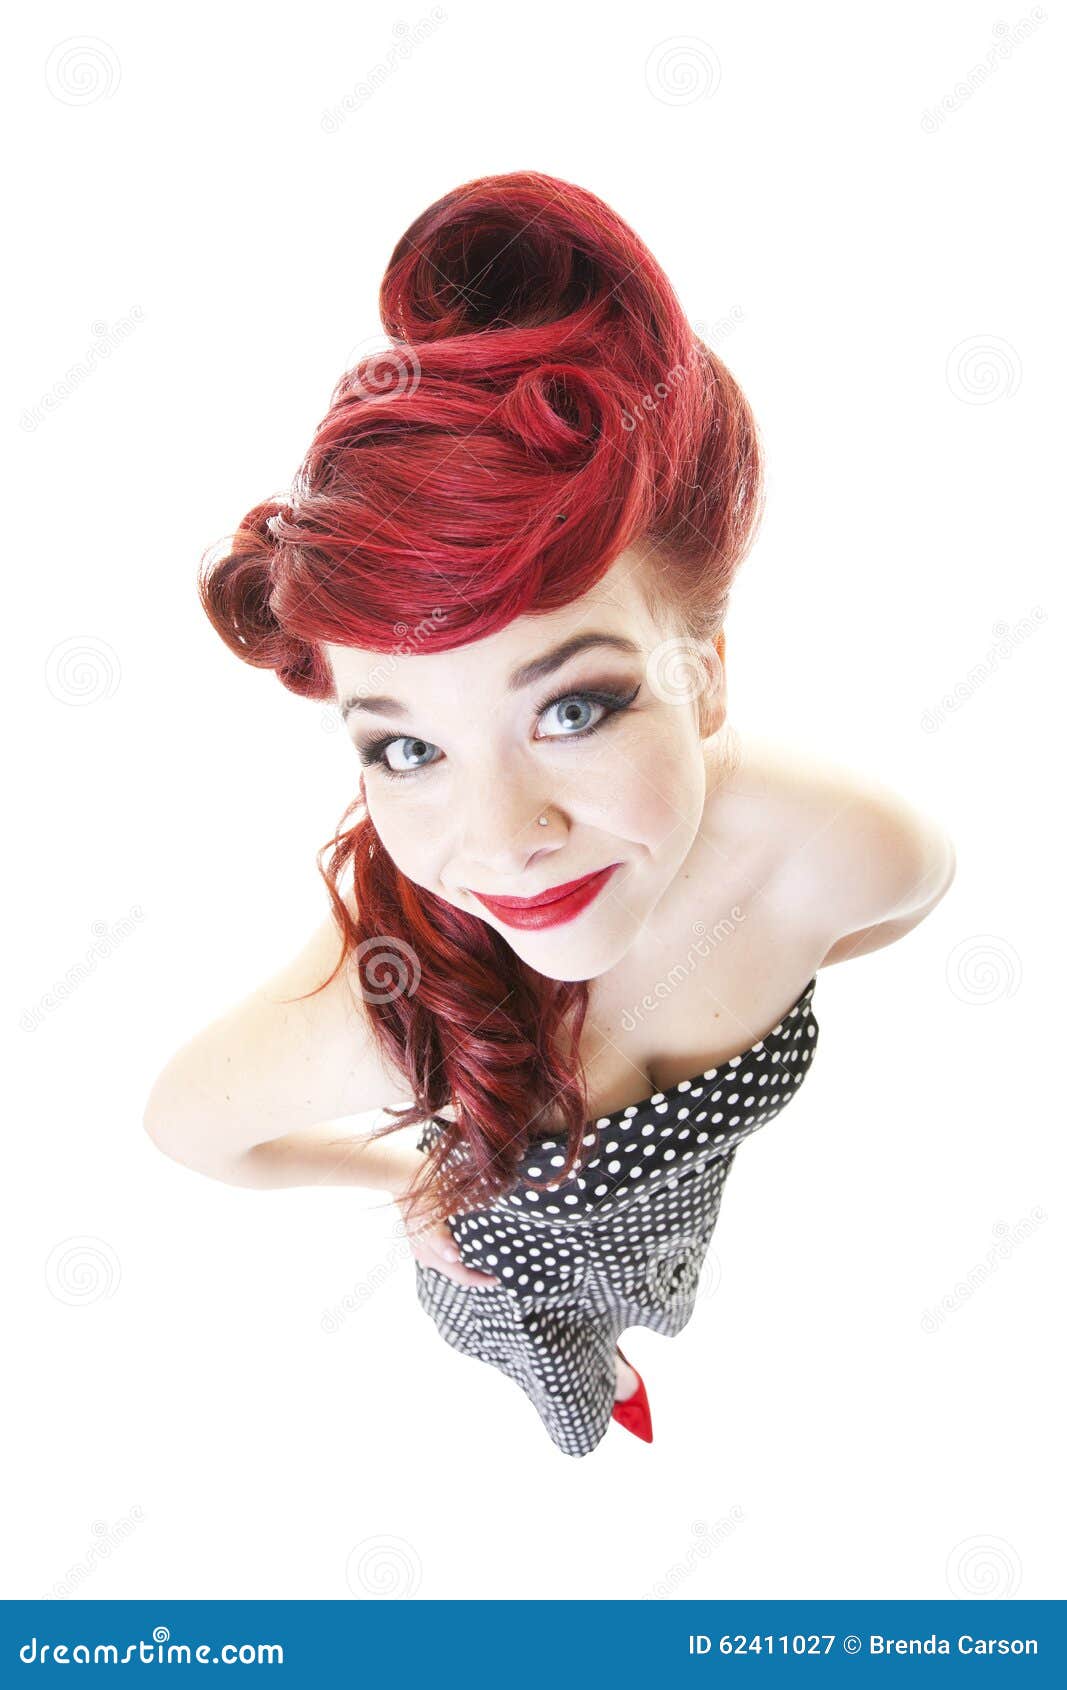 Pin on red hair